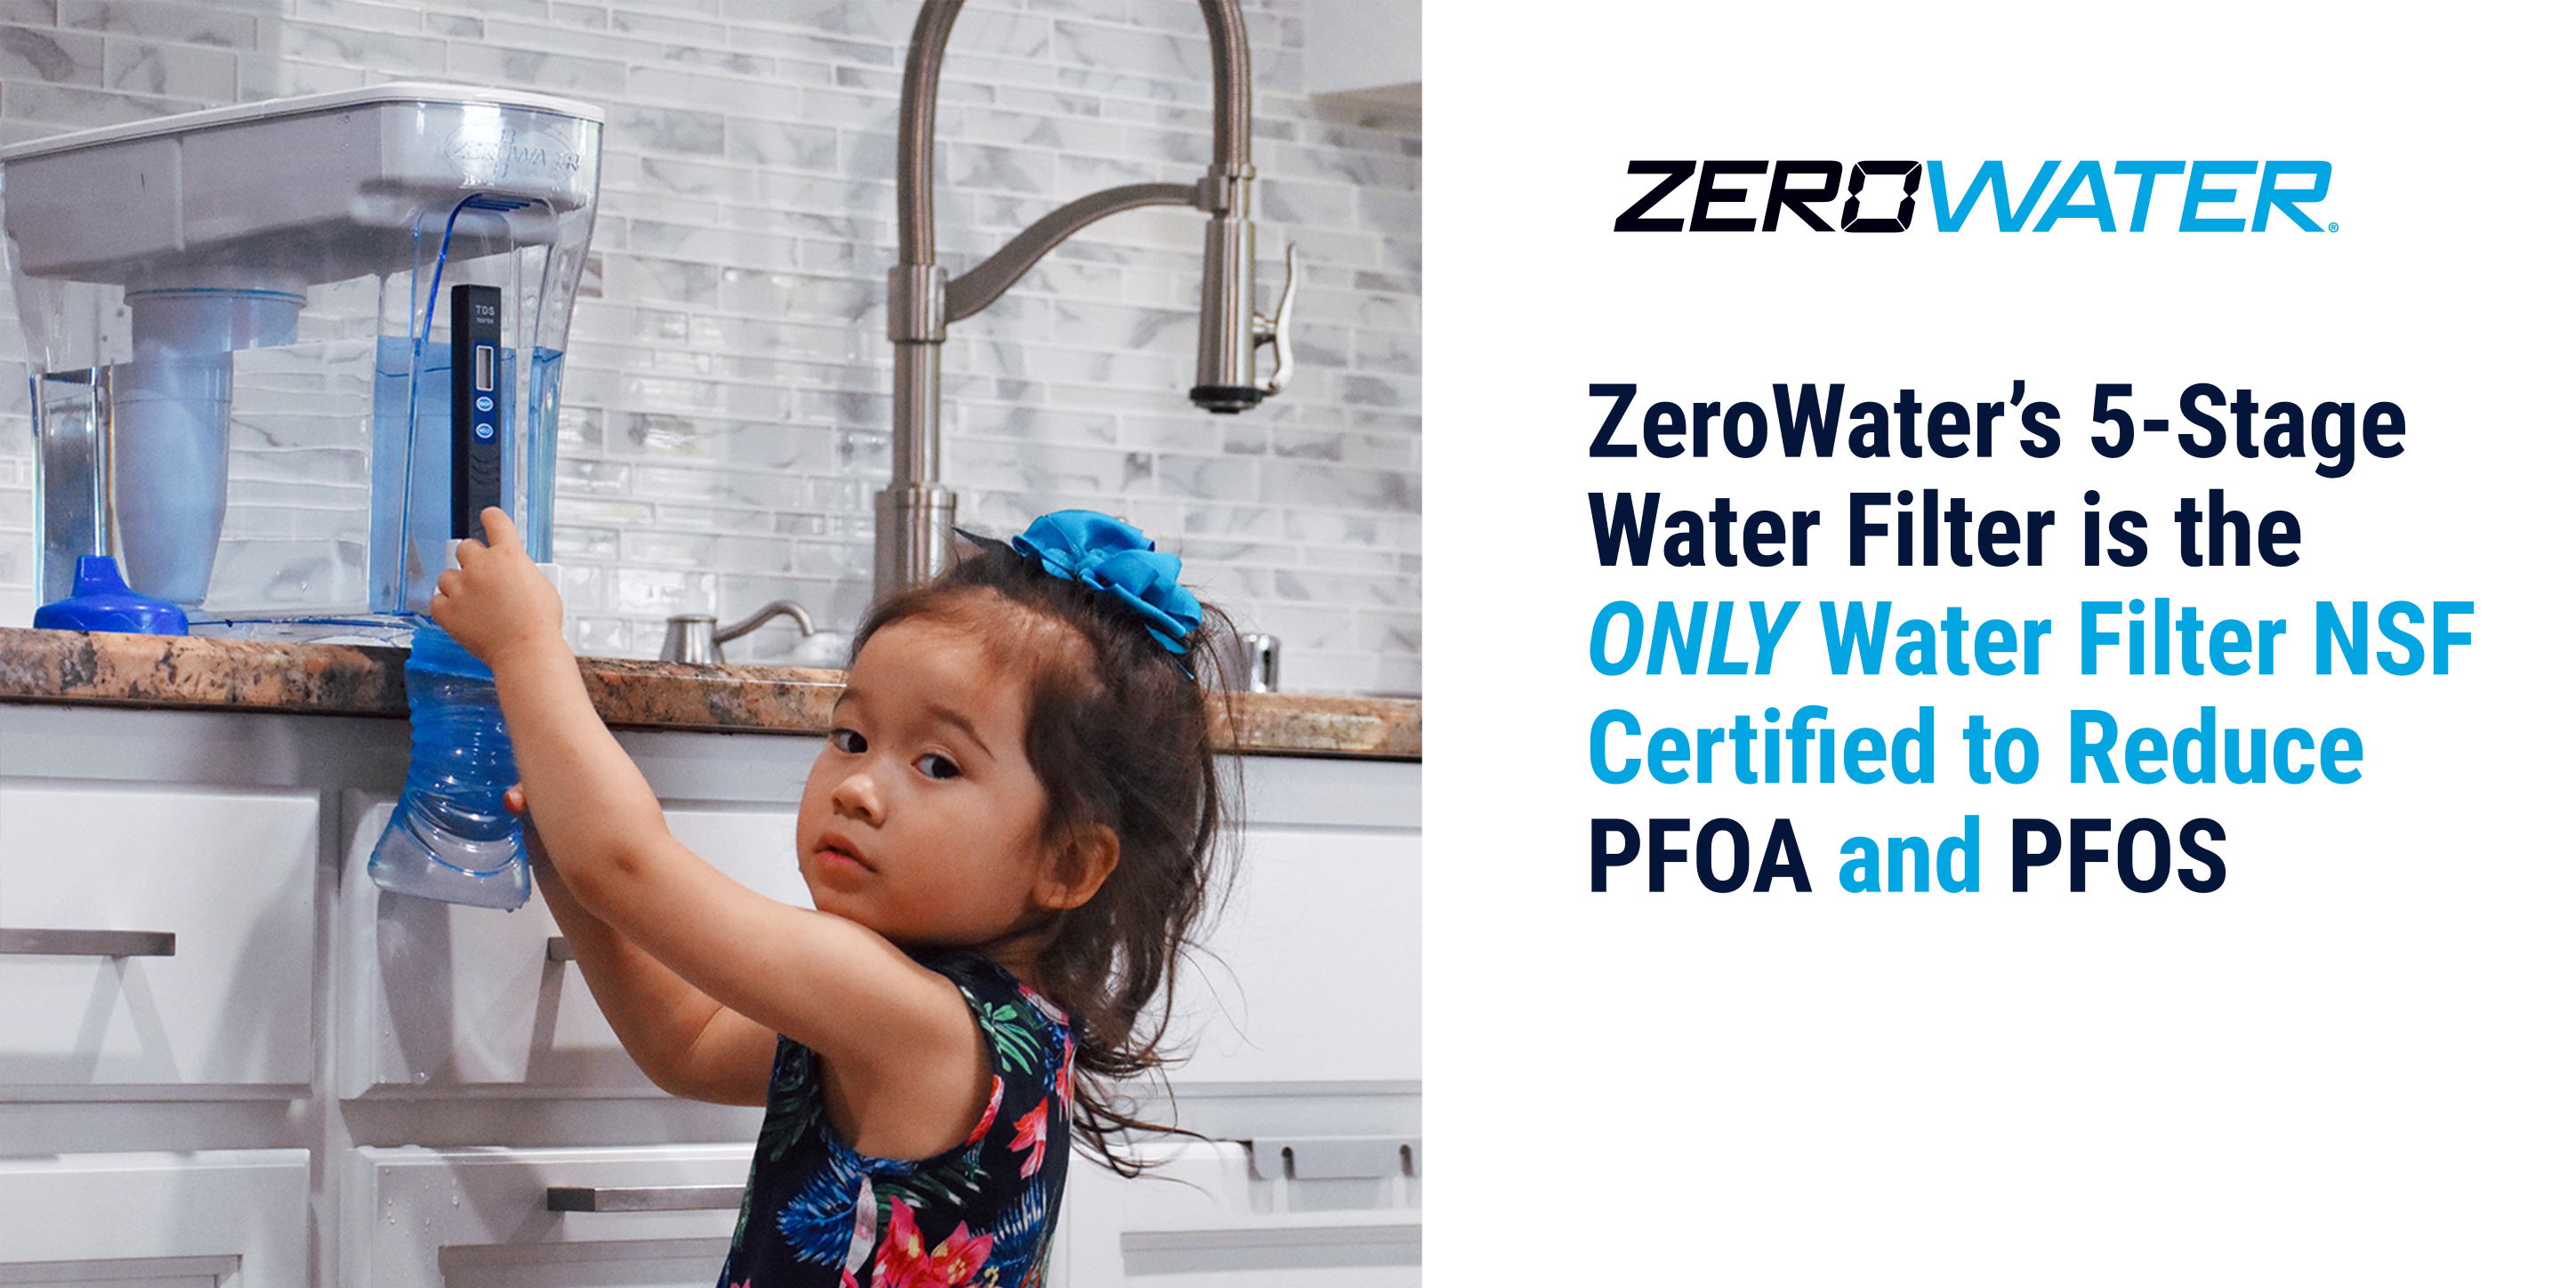 EPA Warning About Health Risks from PFOA & PFOS Even at Low Levels - ZeroWater Only Water Filter NSF Certified to Reduce These Contaminants by Over 90%